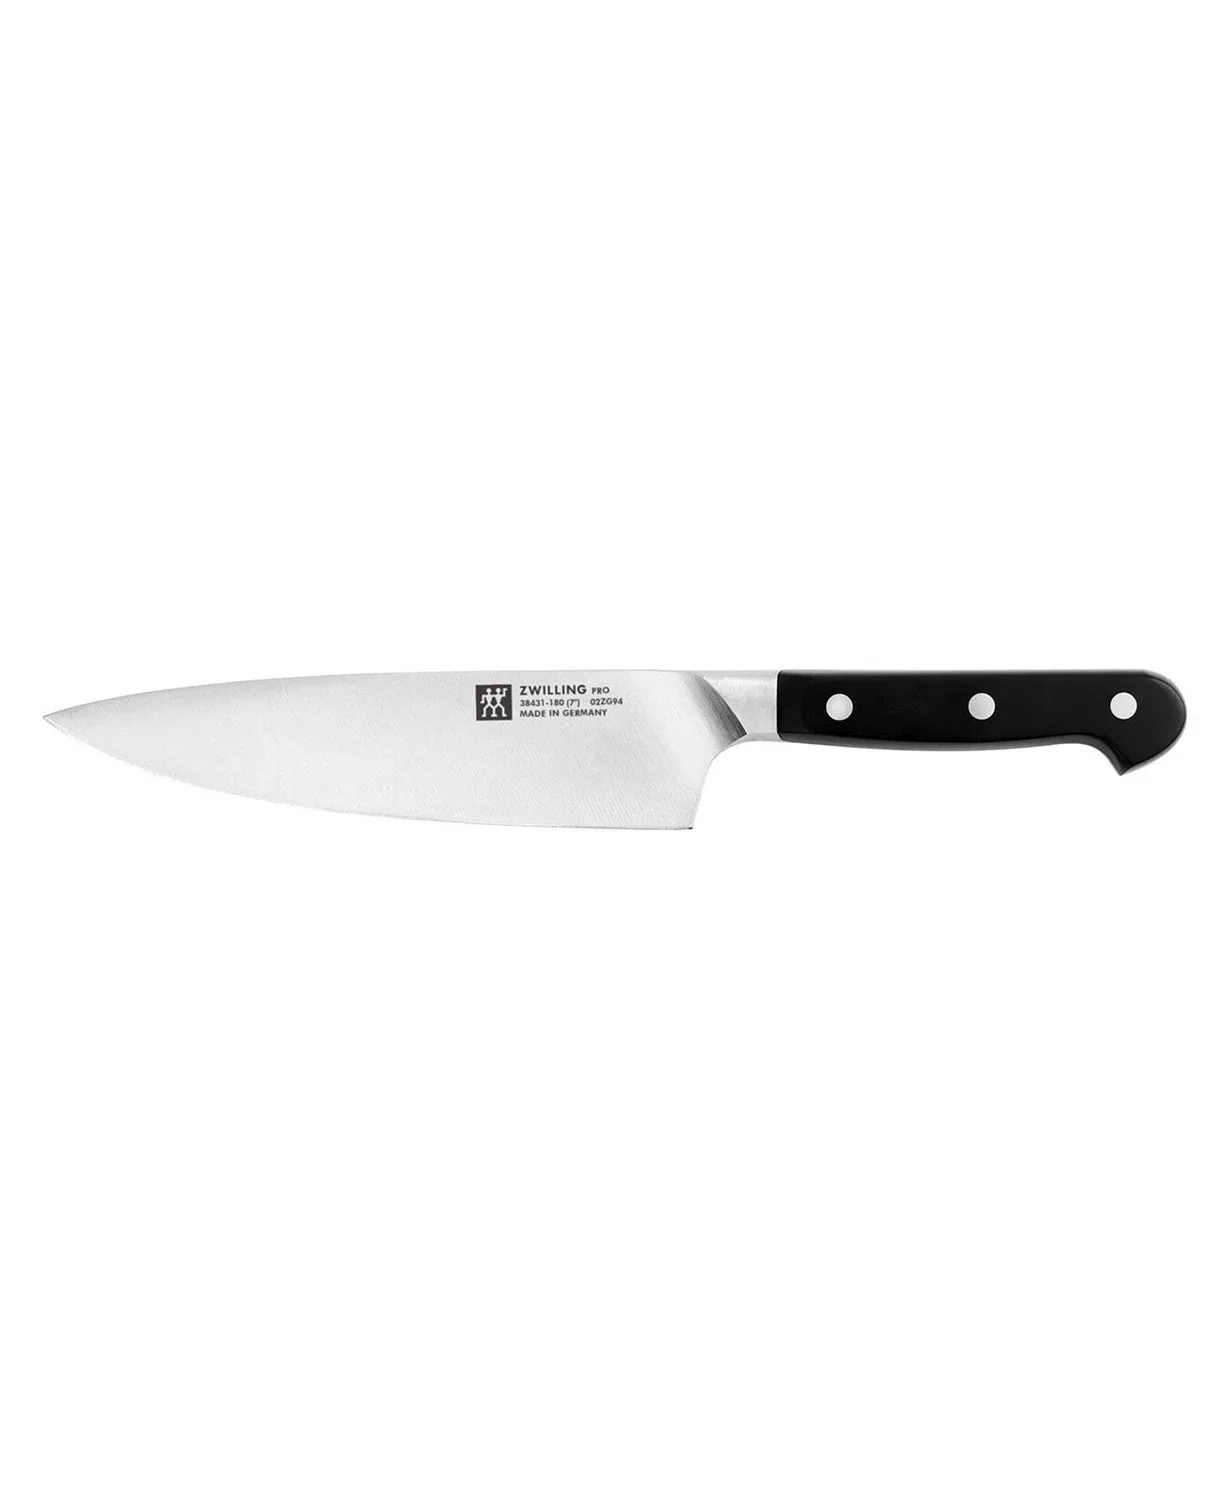 HENCKELS CLASSIC 6-inch Utility Knife - Visual Imperfections